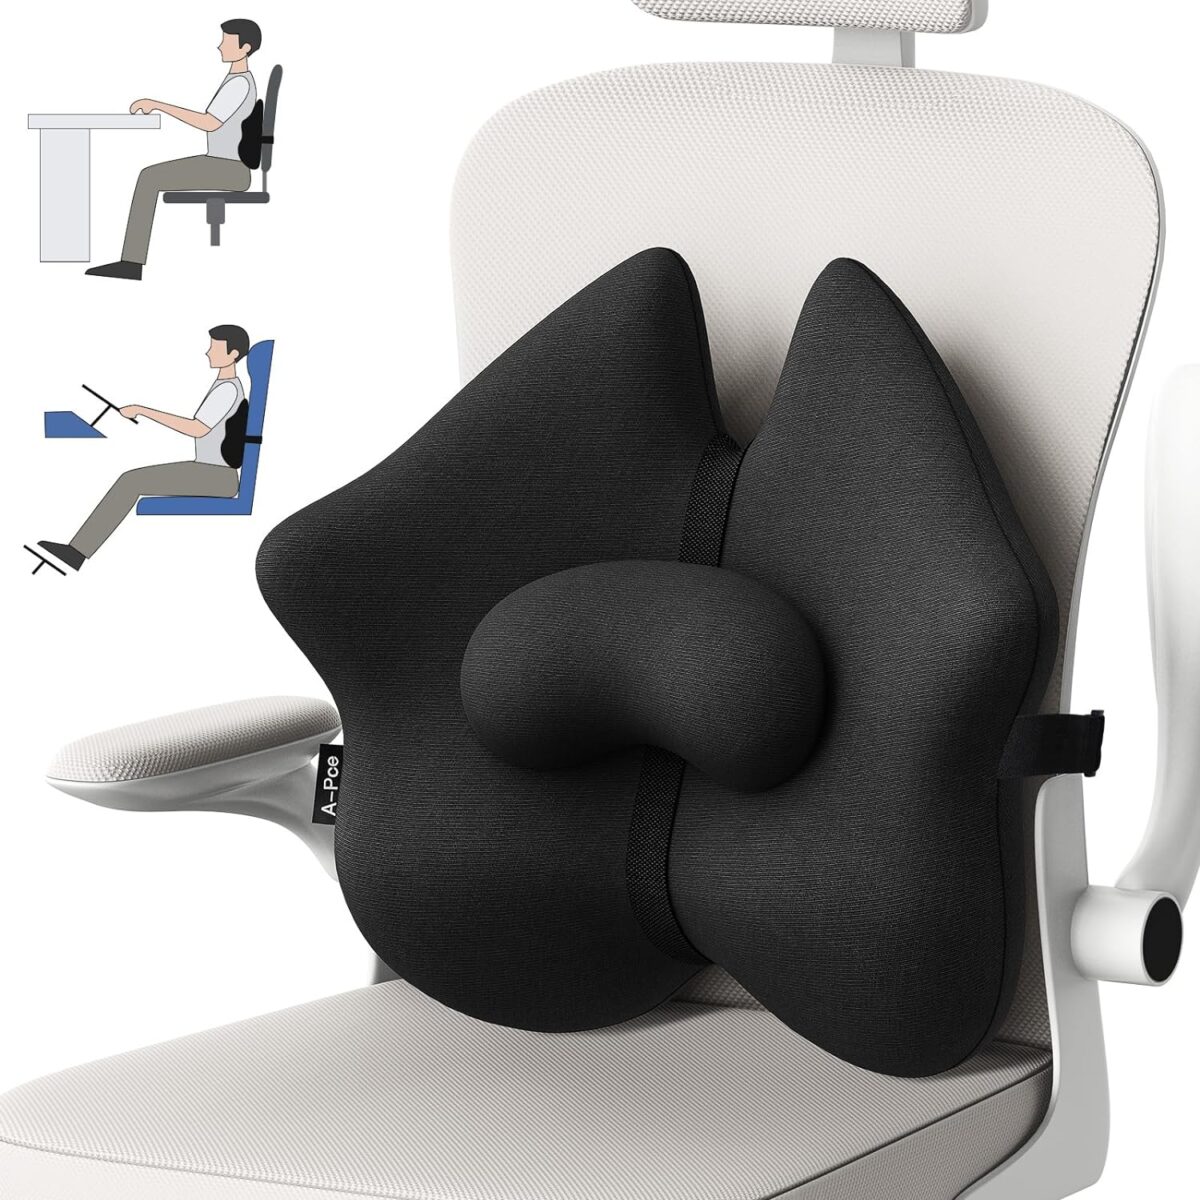 Featured Image for A-Pce Adjustable Lumbar Support Pillow,Improve Lower Back PainRelief & Sitting Posture, Adjustable Slider, Ergonomic Memory Foam Back Cushion for Long Sitting for Office Chair/Car/Plane-Black